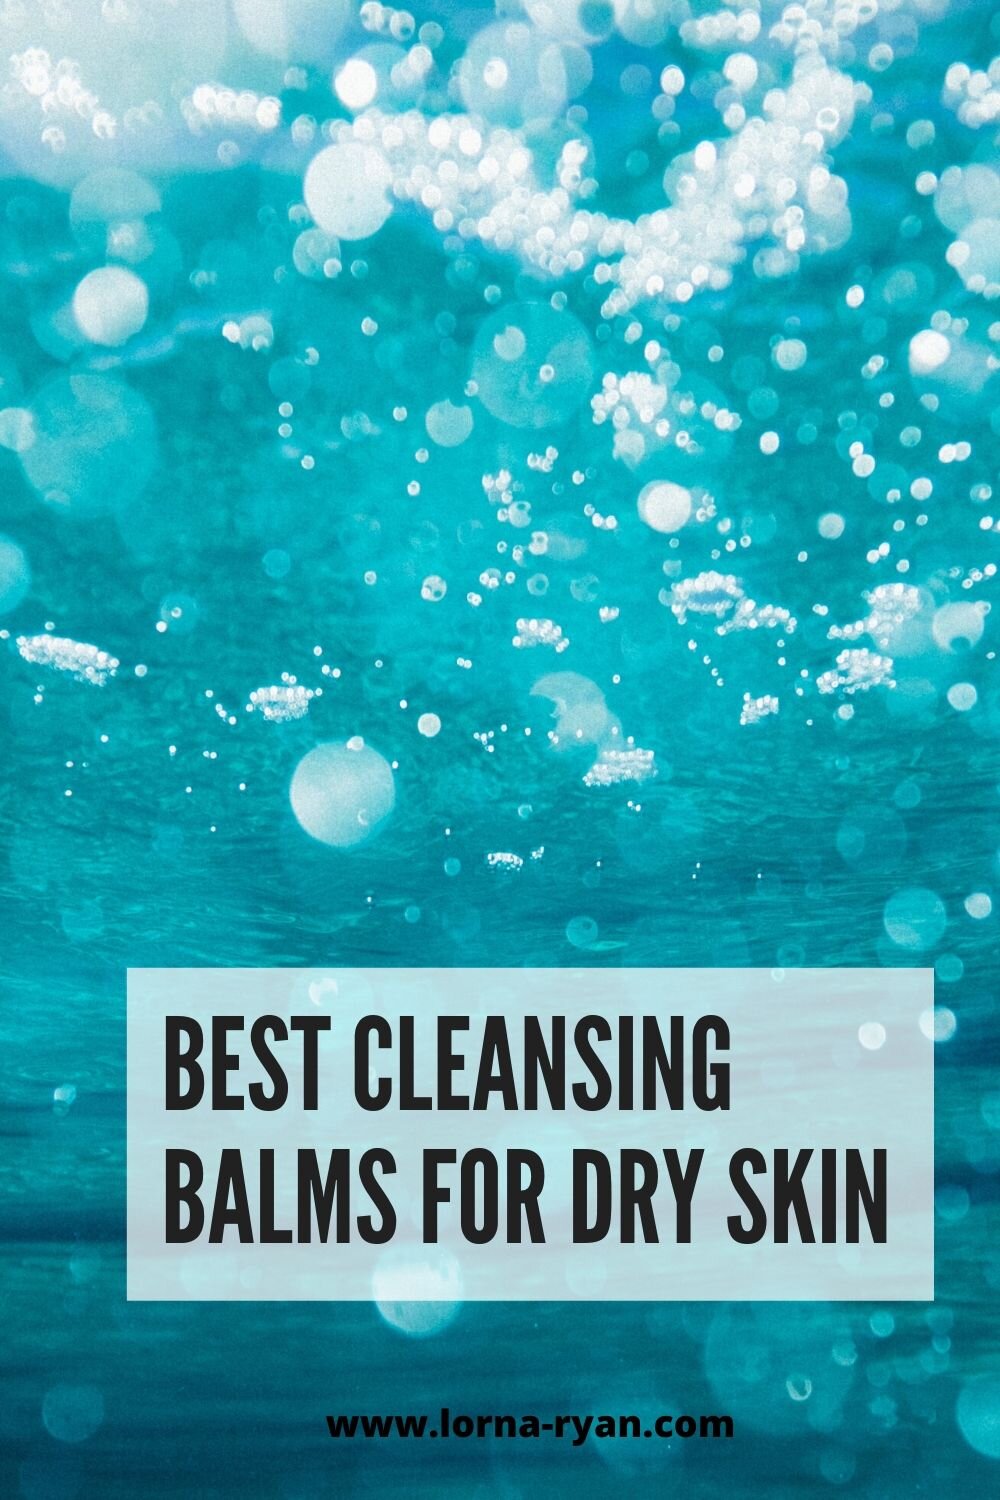 Cleansing balms melt away makeup and dirt without stripping moisture, ideal for dry skin. We researched the best cleansing balms for every skin type including dry skin. these cleansing balms are so gentle and hydrate while cleansing and melting away…